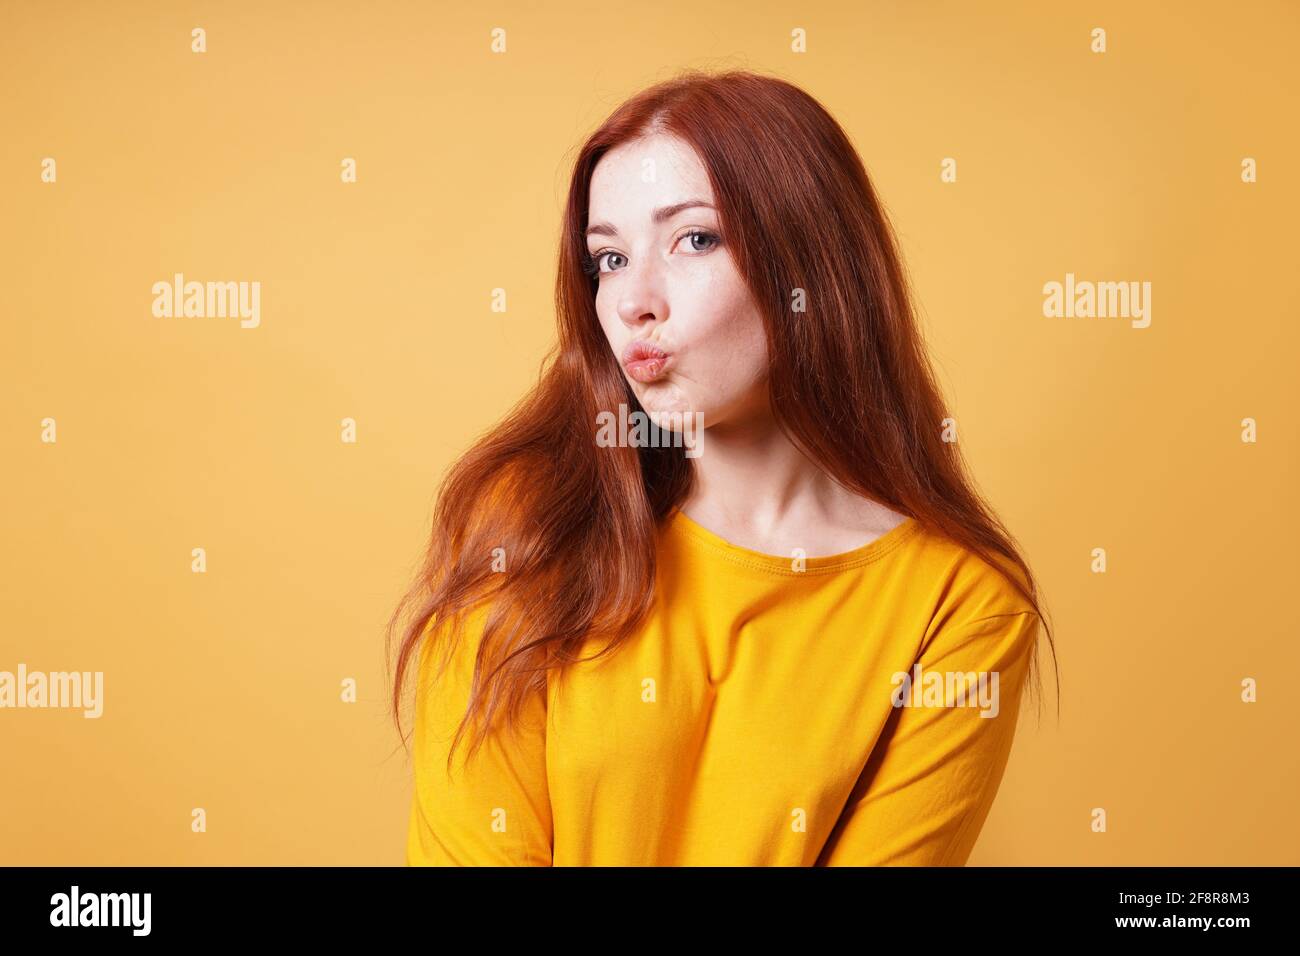 young woman puckering her lips for a kiss or duckface facial expression Stock Photo